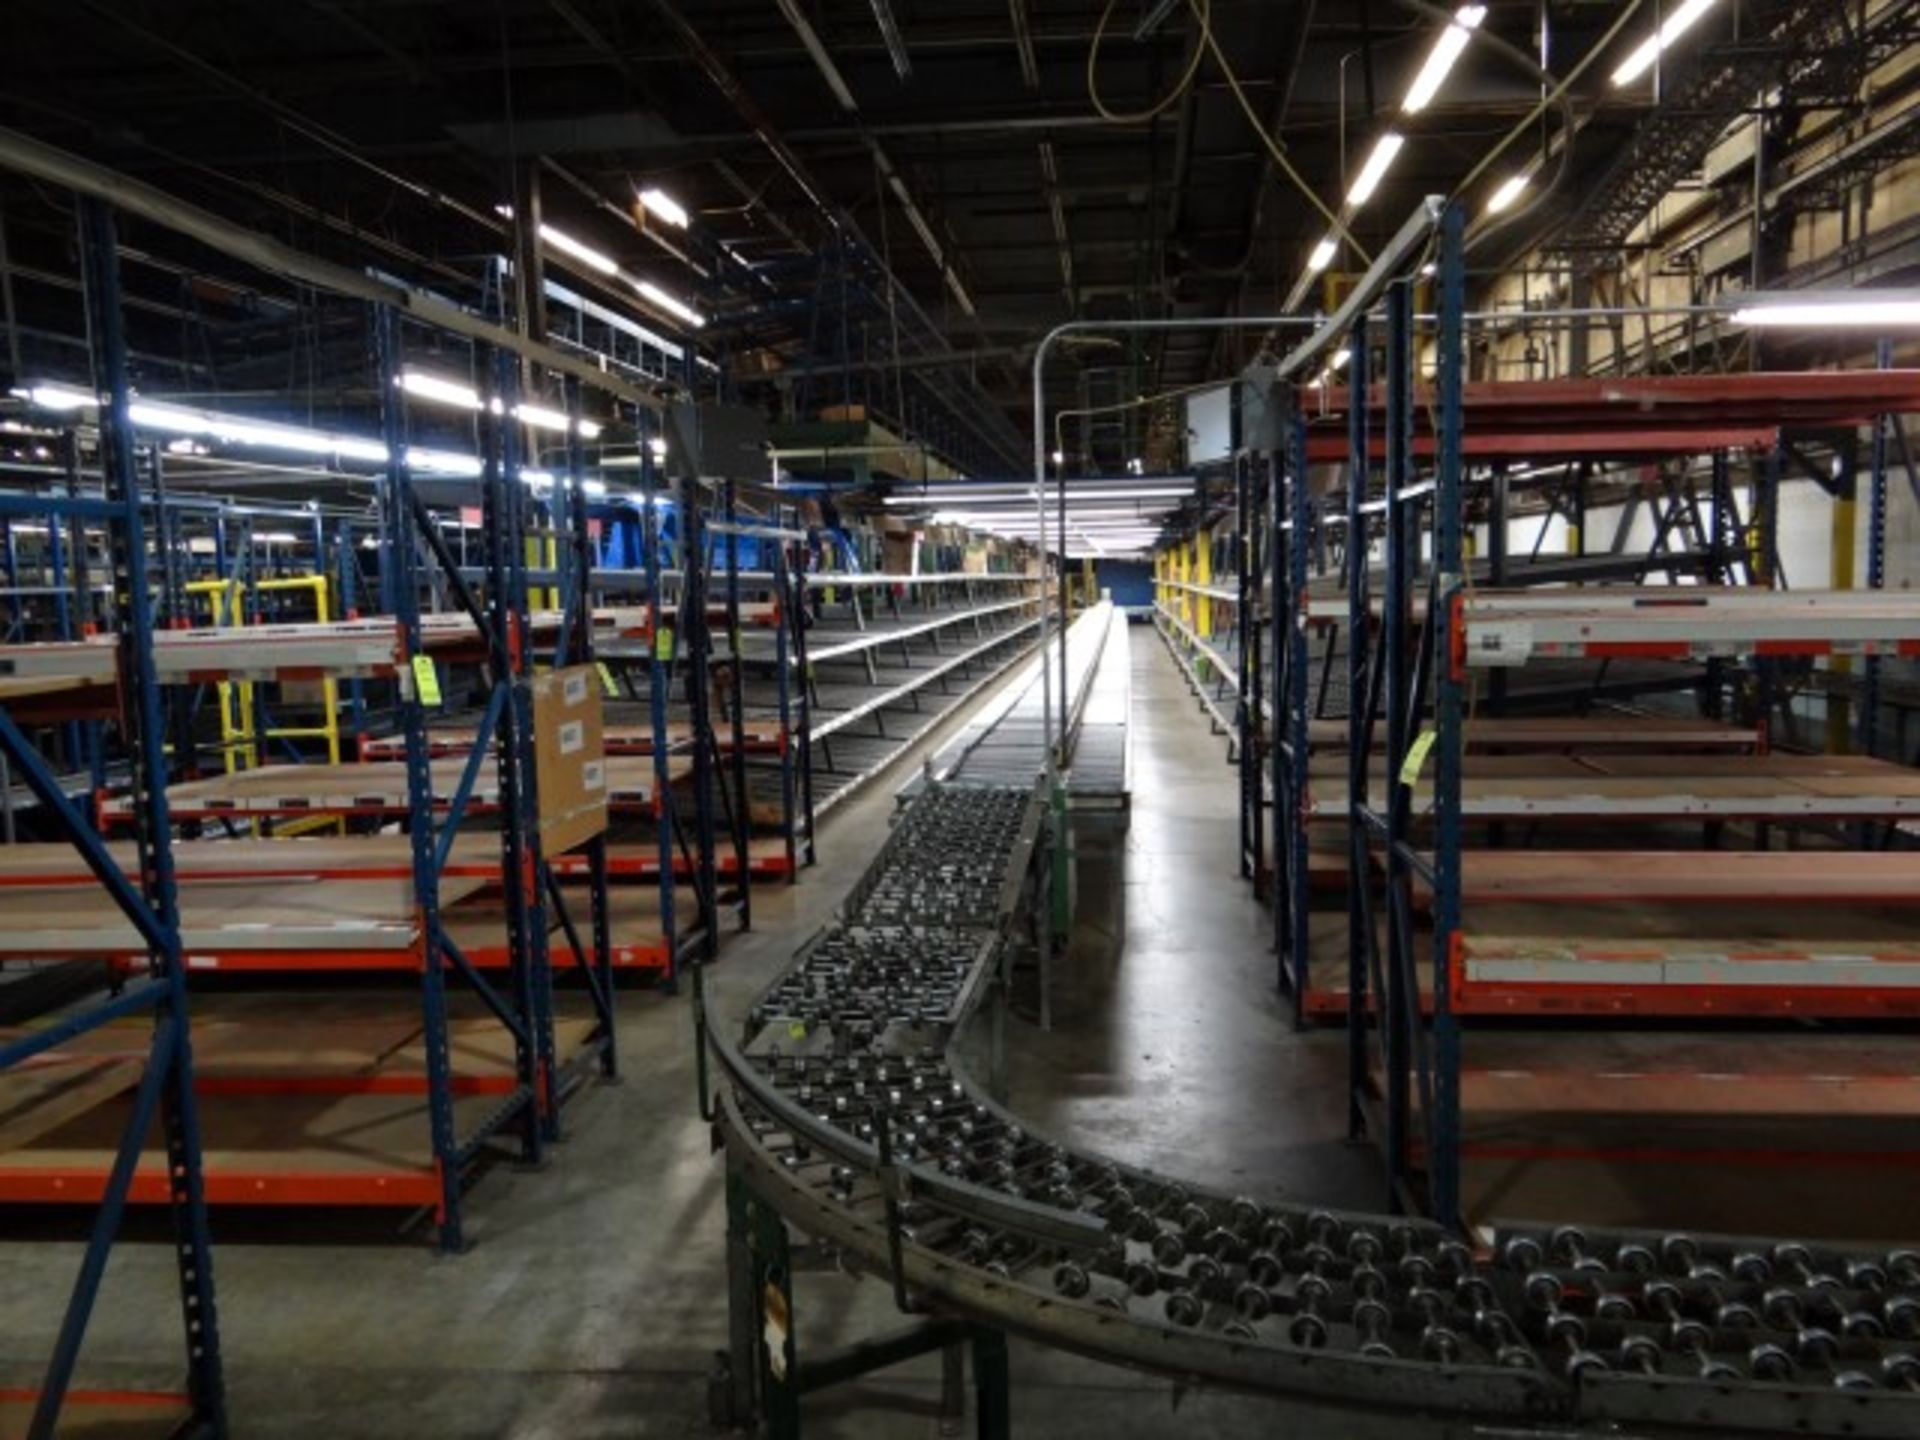 Tech King Cigarette Pick to Light System with 6 Pick Stations, Conveyors, Flow Racks, Box Tram and - Image 50 of 57